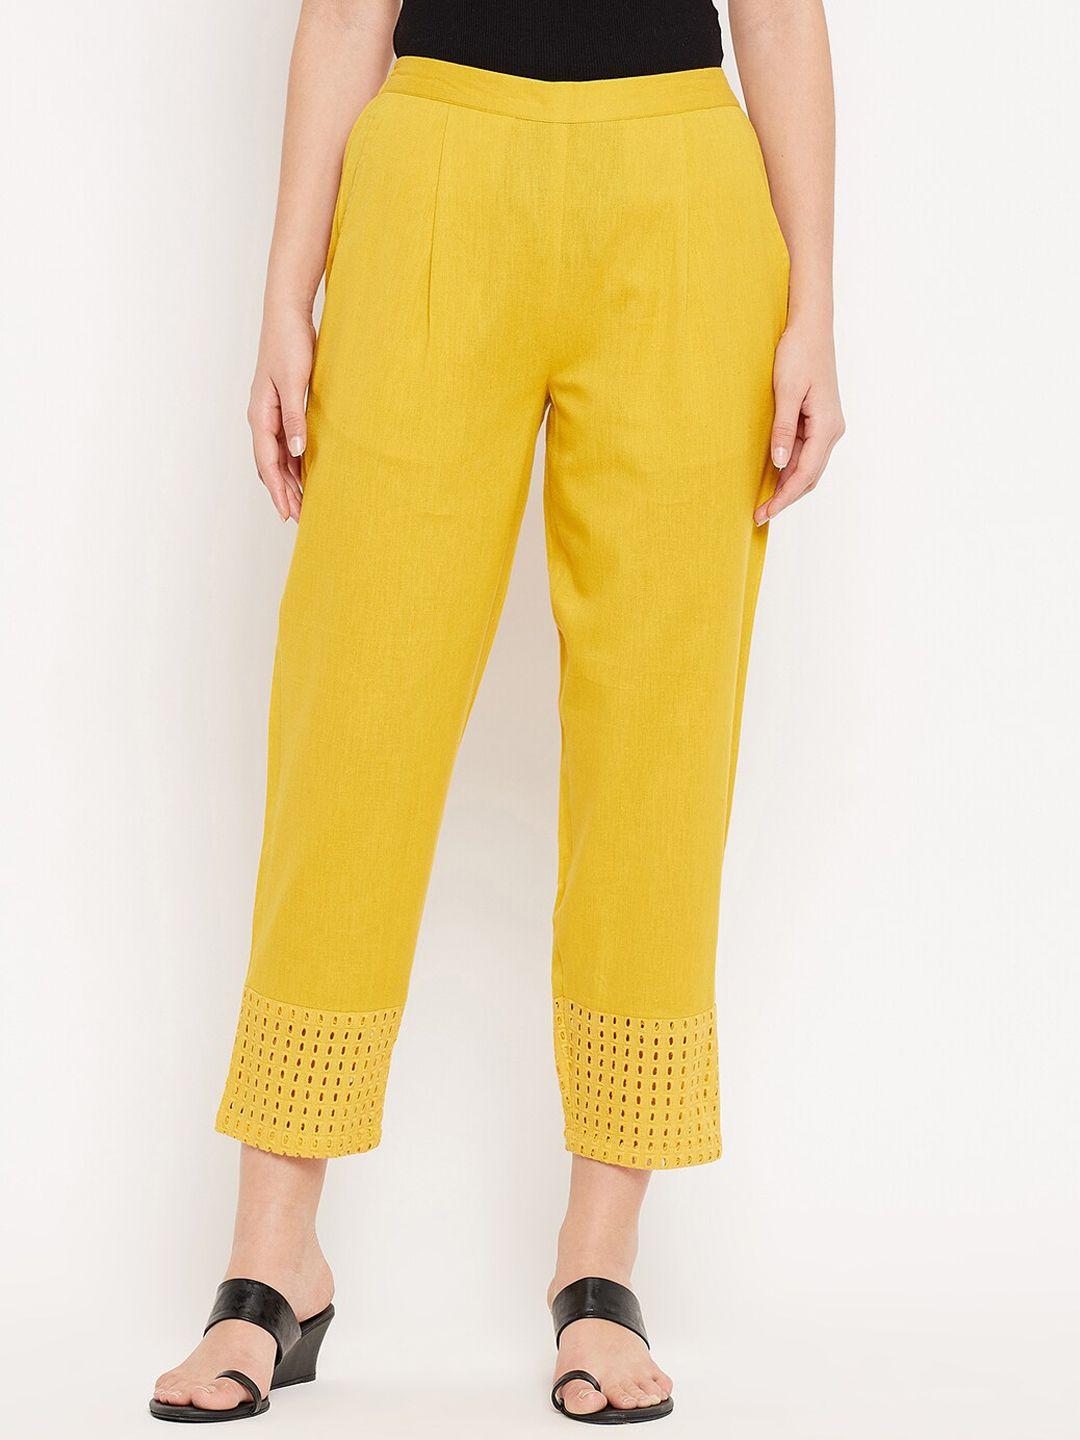 winered-women-yellow-comfort-easy-wash-pleated-cotton-trouser